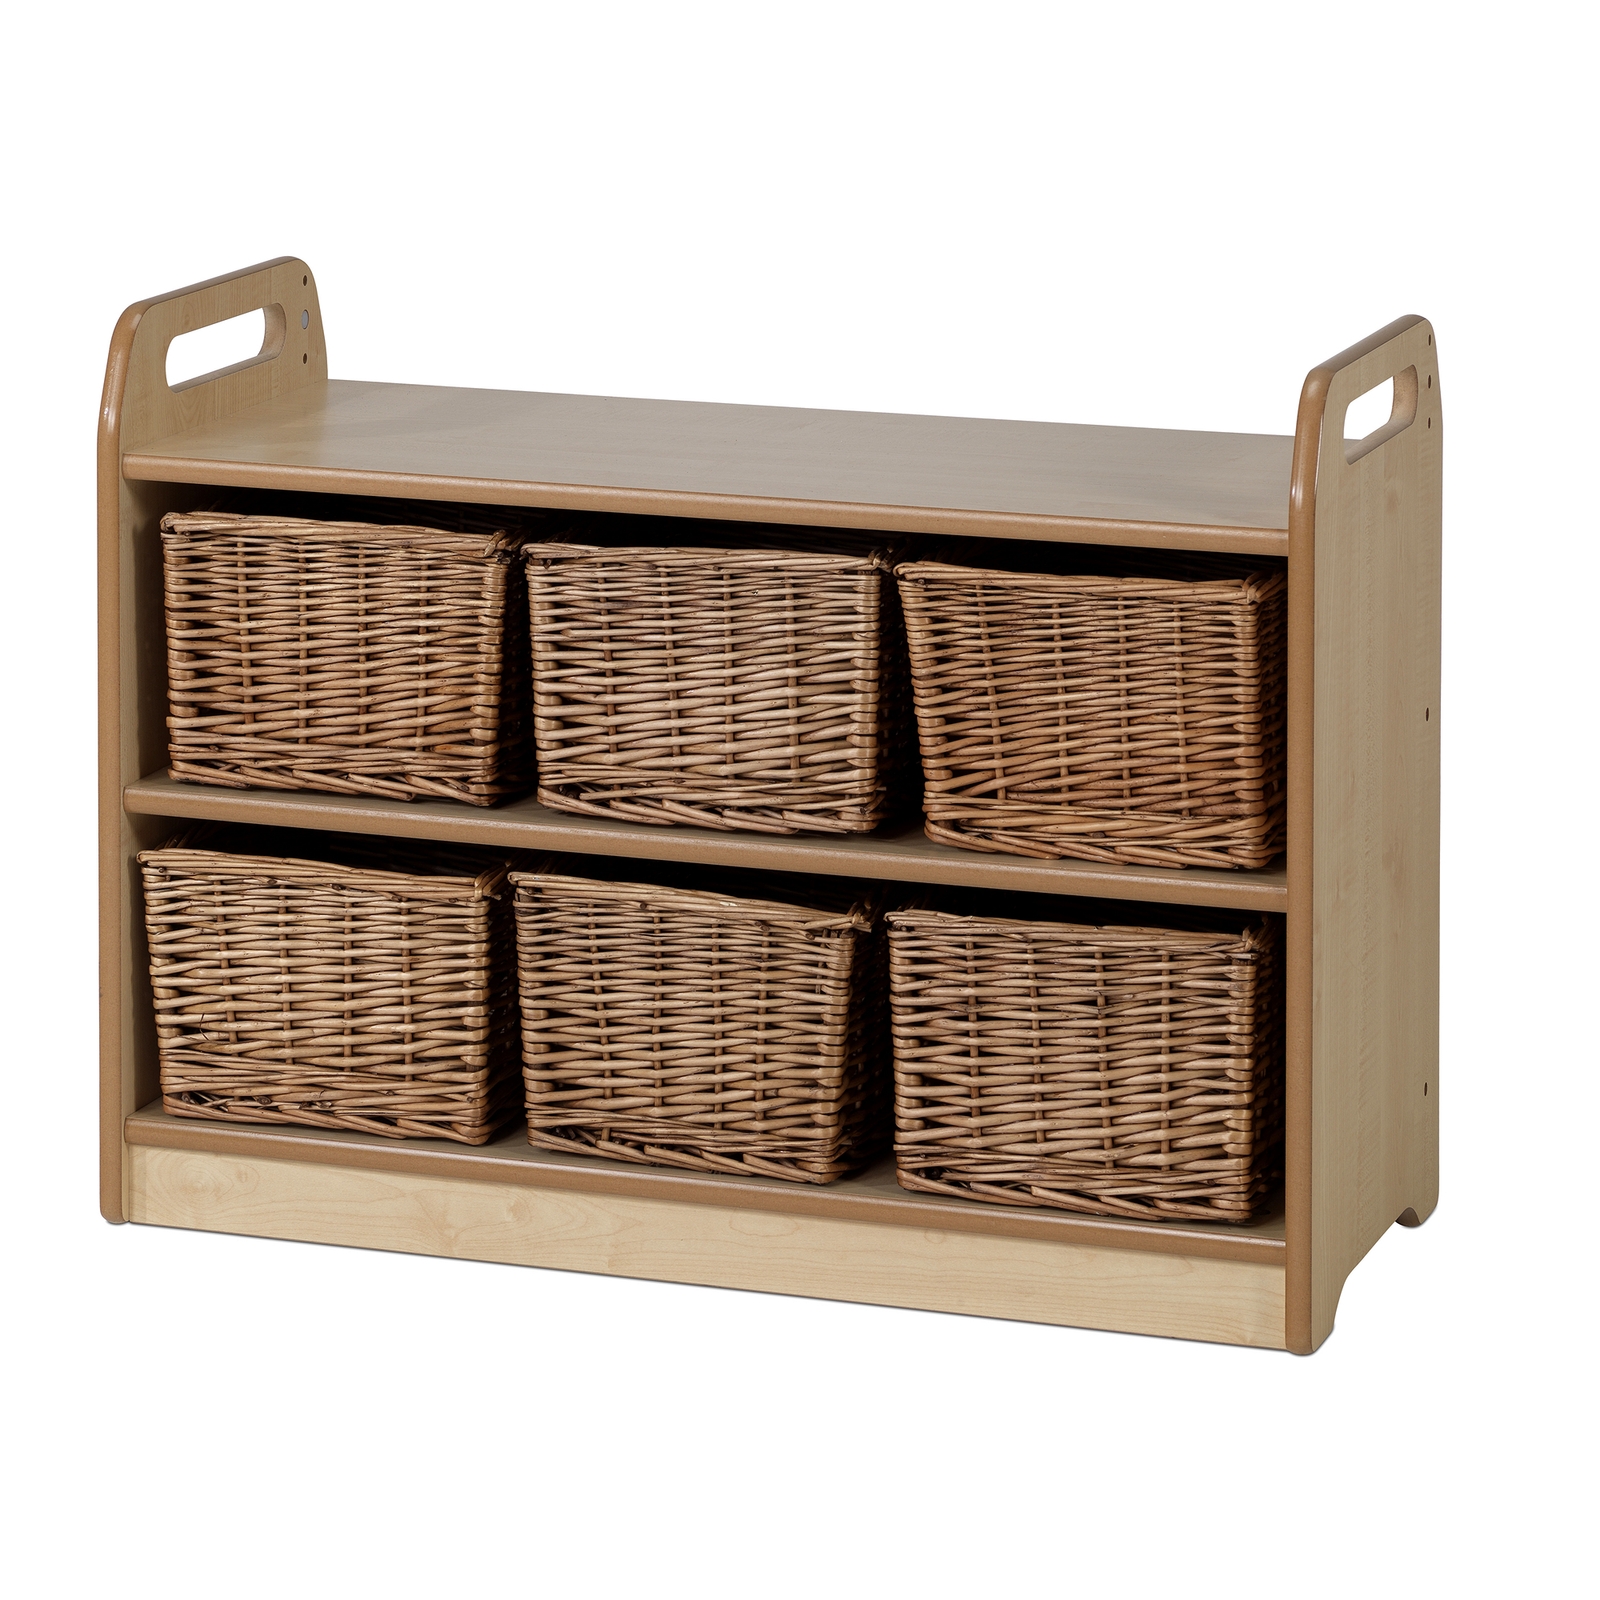 Playscapes Display Unit With Mirror -wicker Baskets